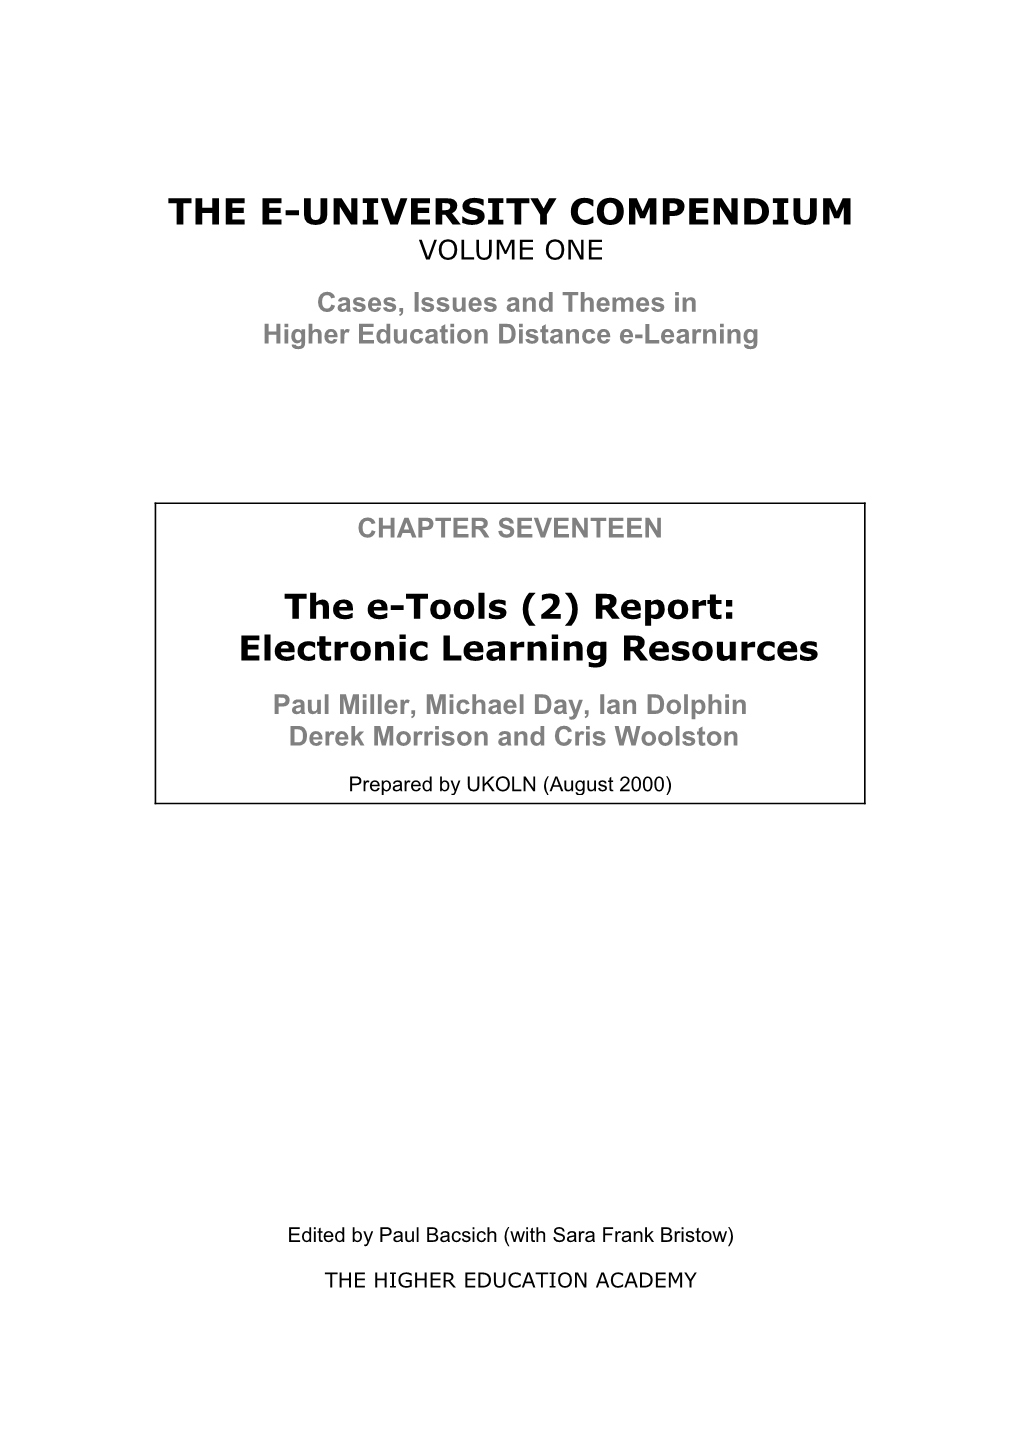 The E-Tools (2) Report: Electronic Learning Resources